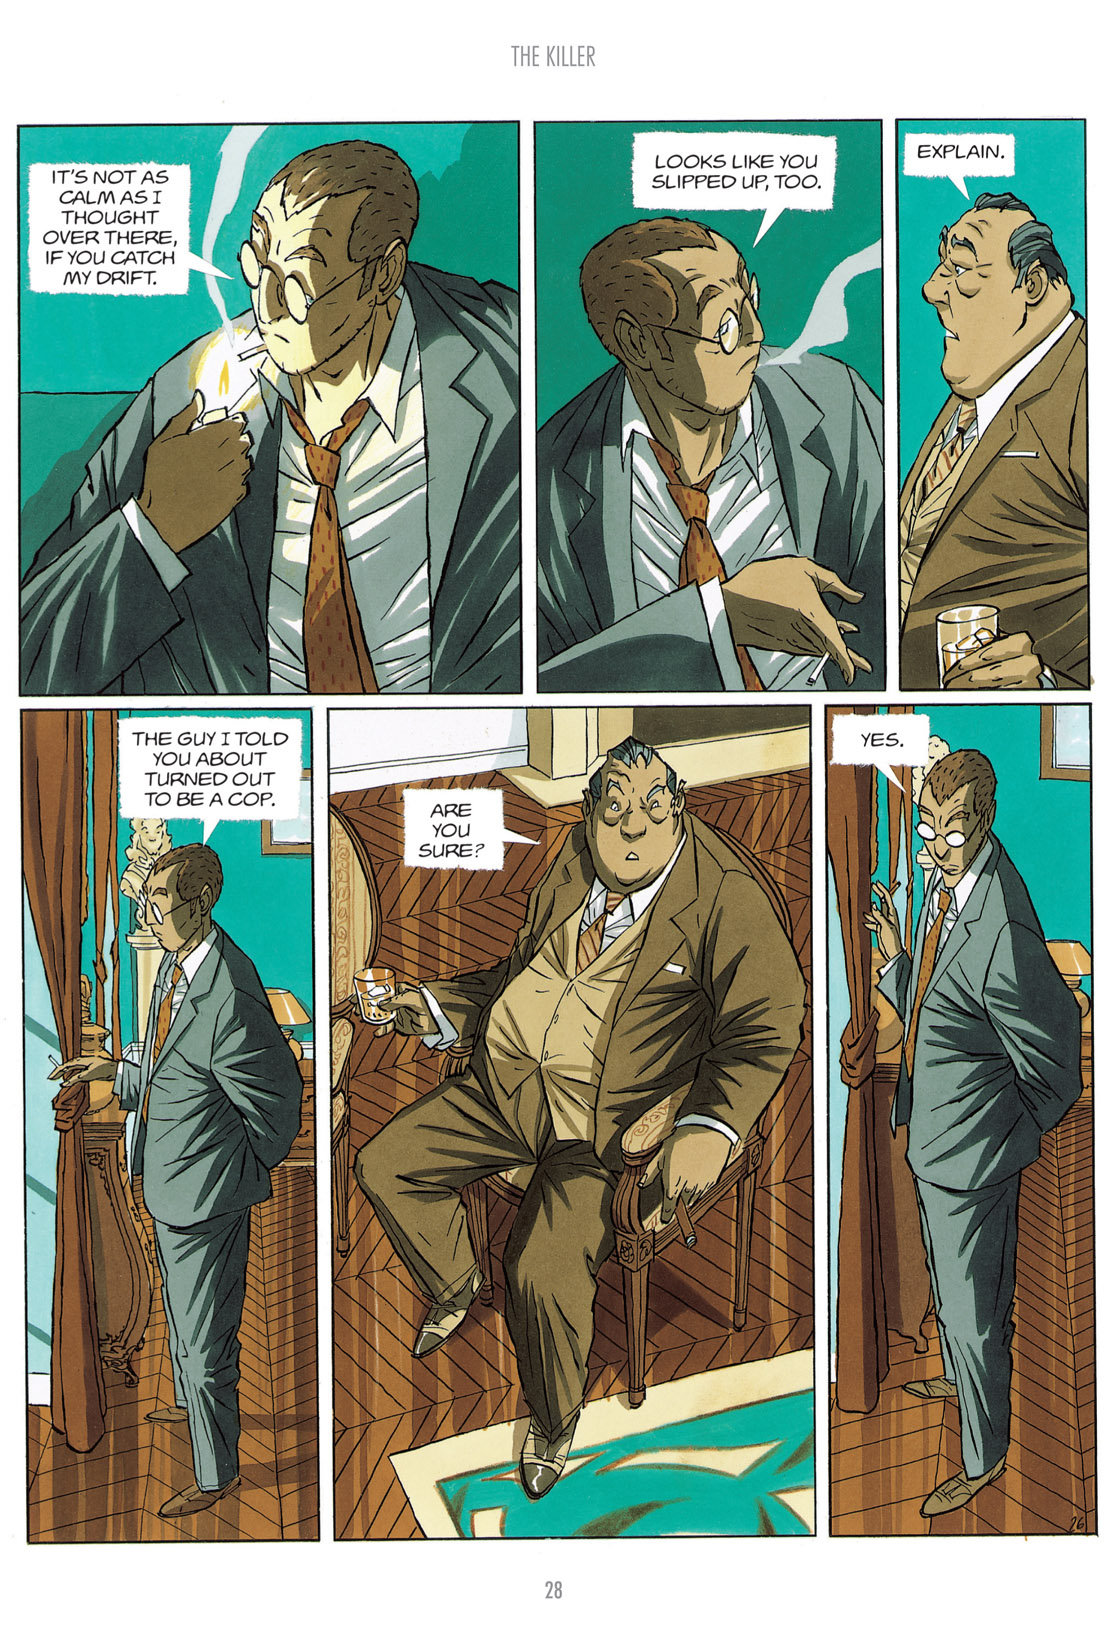 Read online The Killer comic -  Issue # TPB 1 - 101